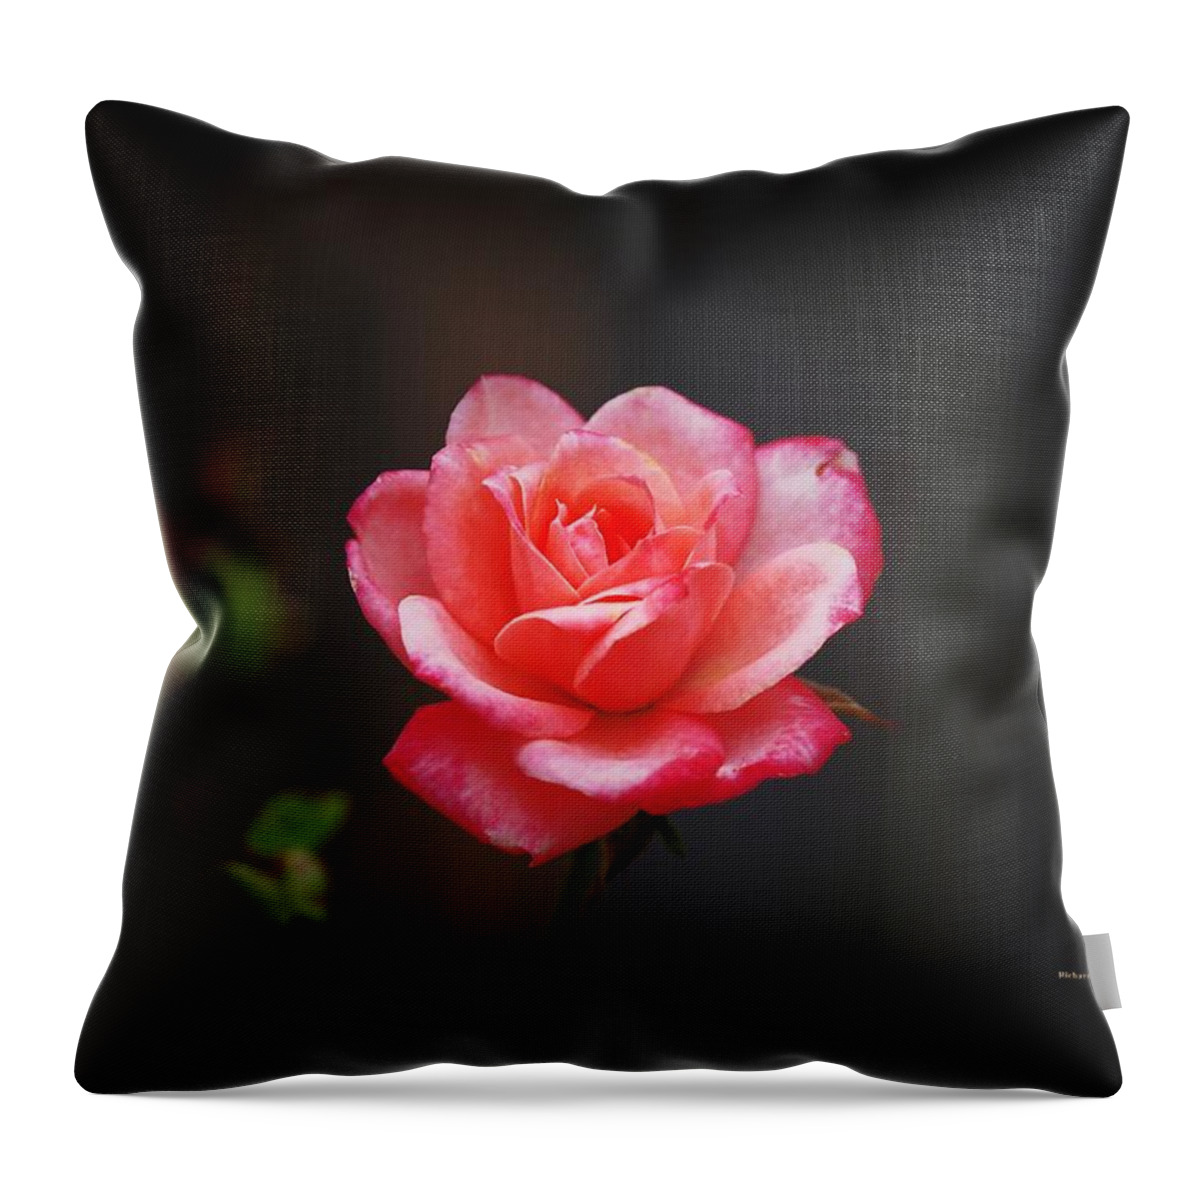 Botanical Throw Pillow featuring the photograph Miniature Pink Beauty by Richard Thomas